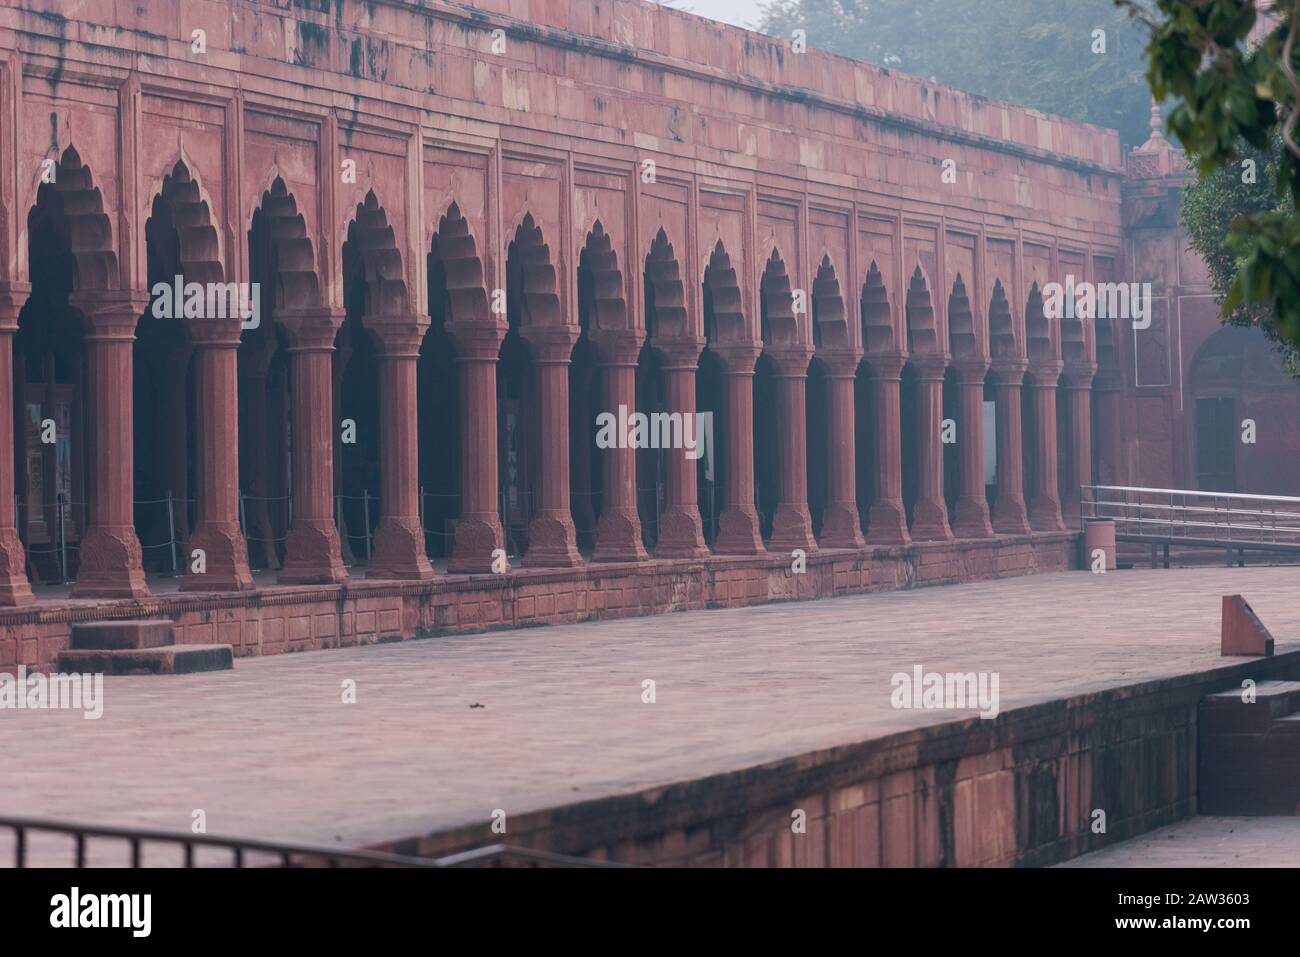 Row of columns inside the Taj Mahal made of red sandstone  in Agra, India Stock Photo